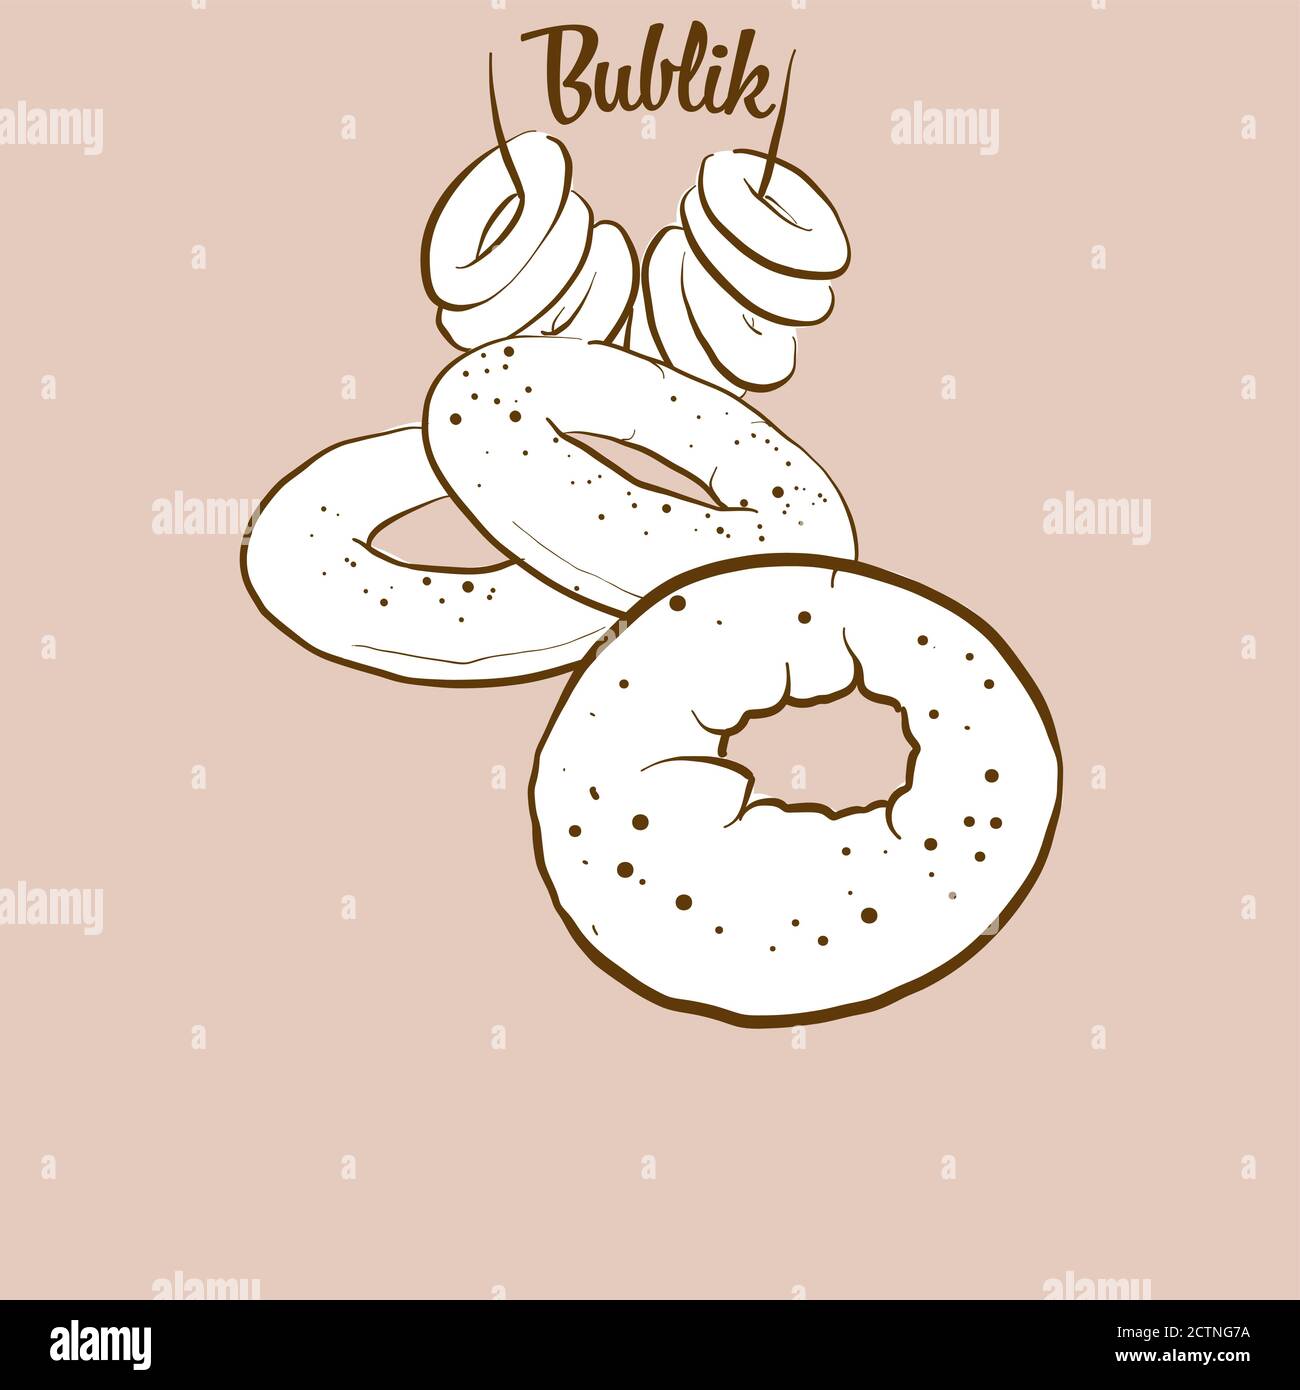 Hand-drawn Bublik bread illustration. Wheat bread, usually known in Poland. Vector drawing series. Stock Vector